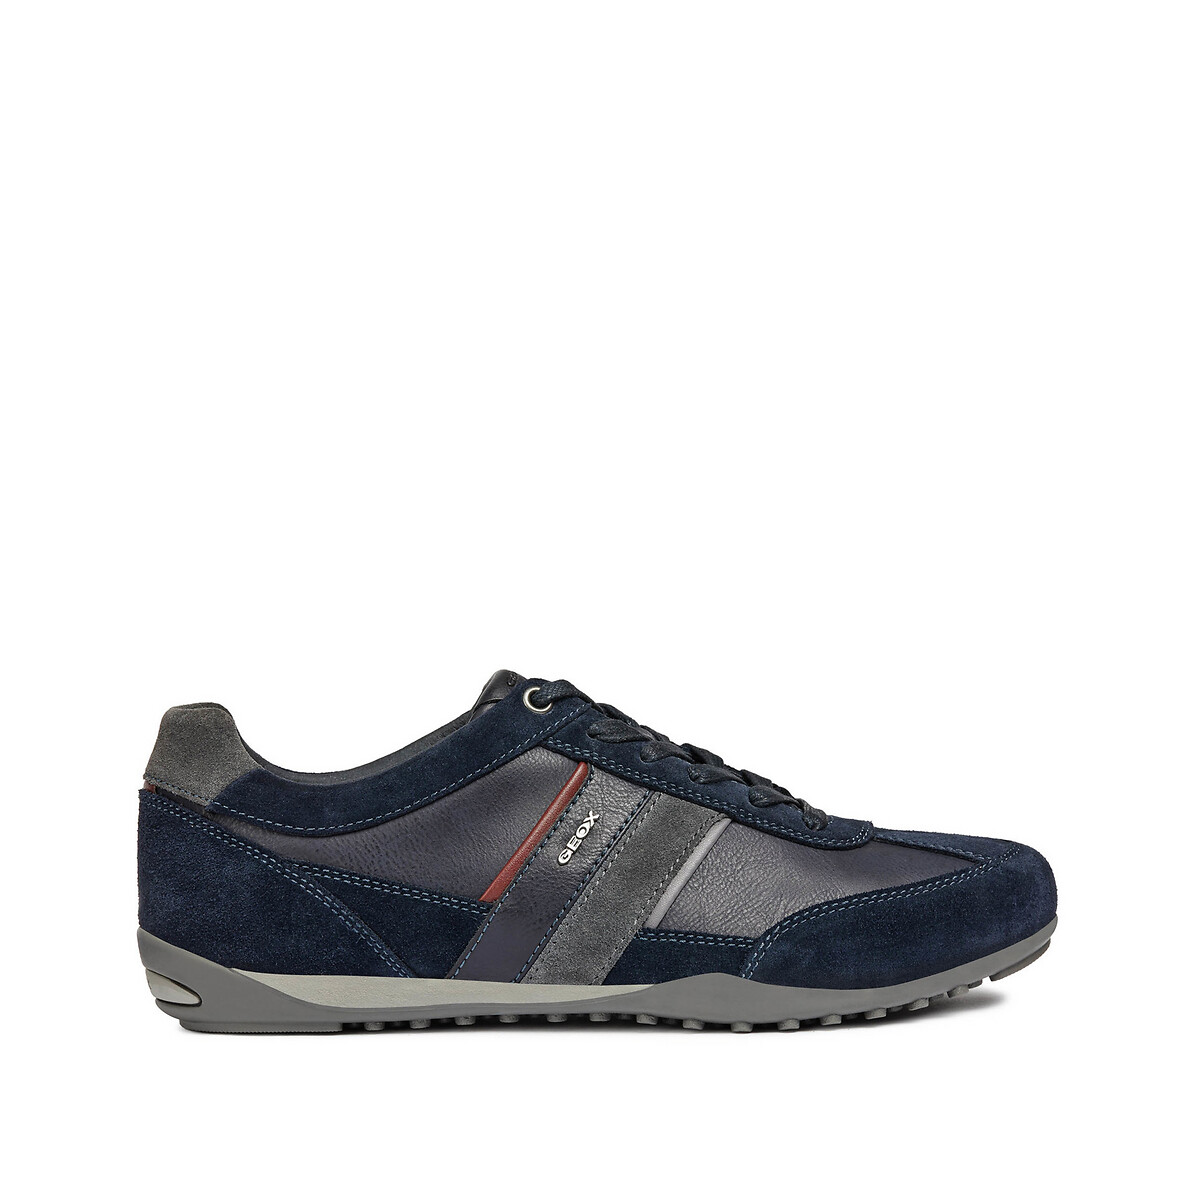 Wells leather trainers, navy blue, Geox | La Redoute